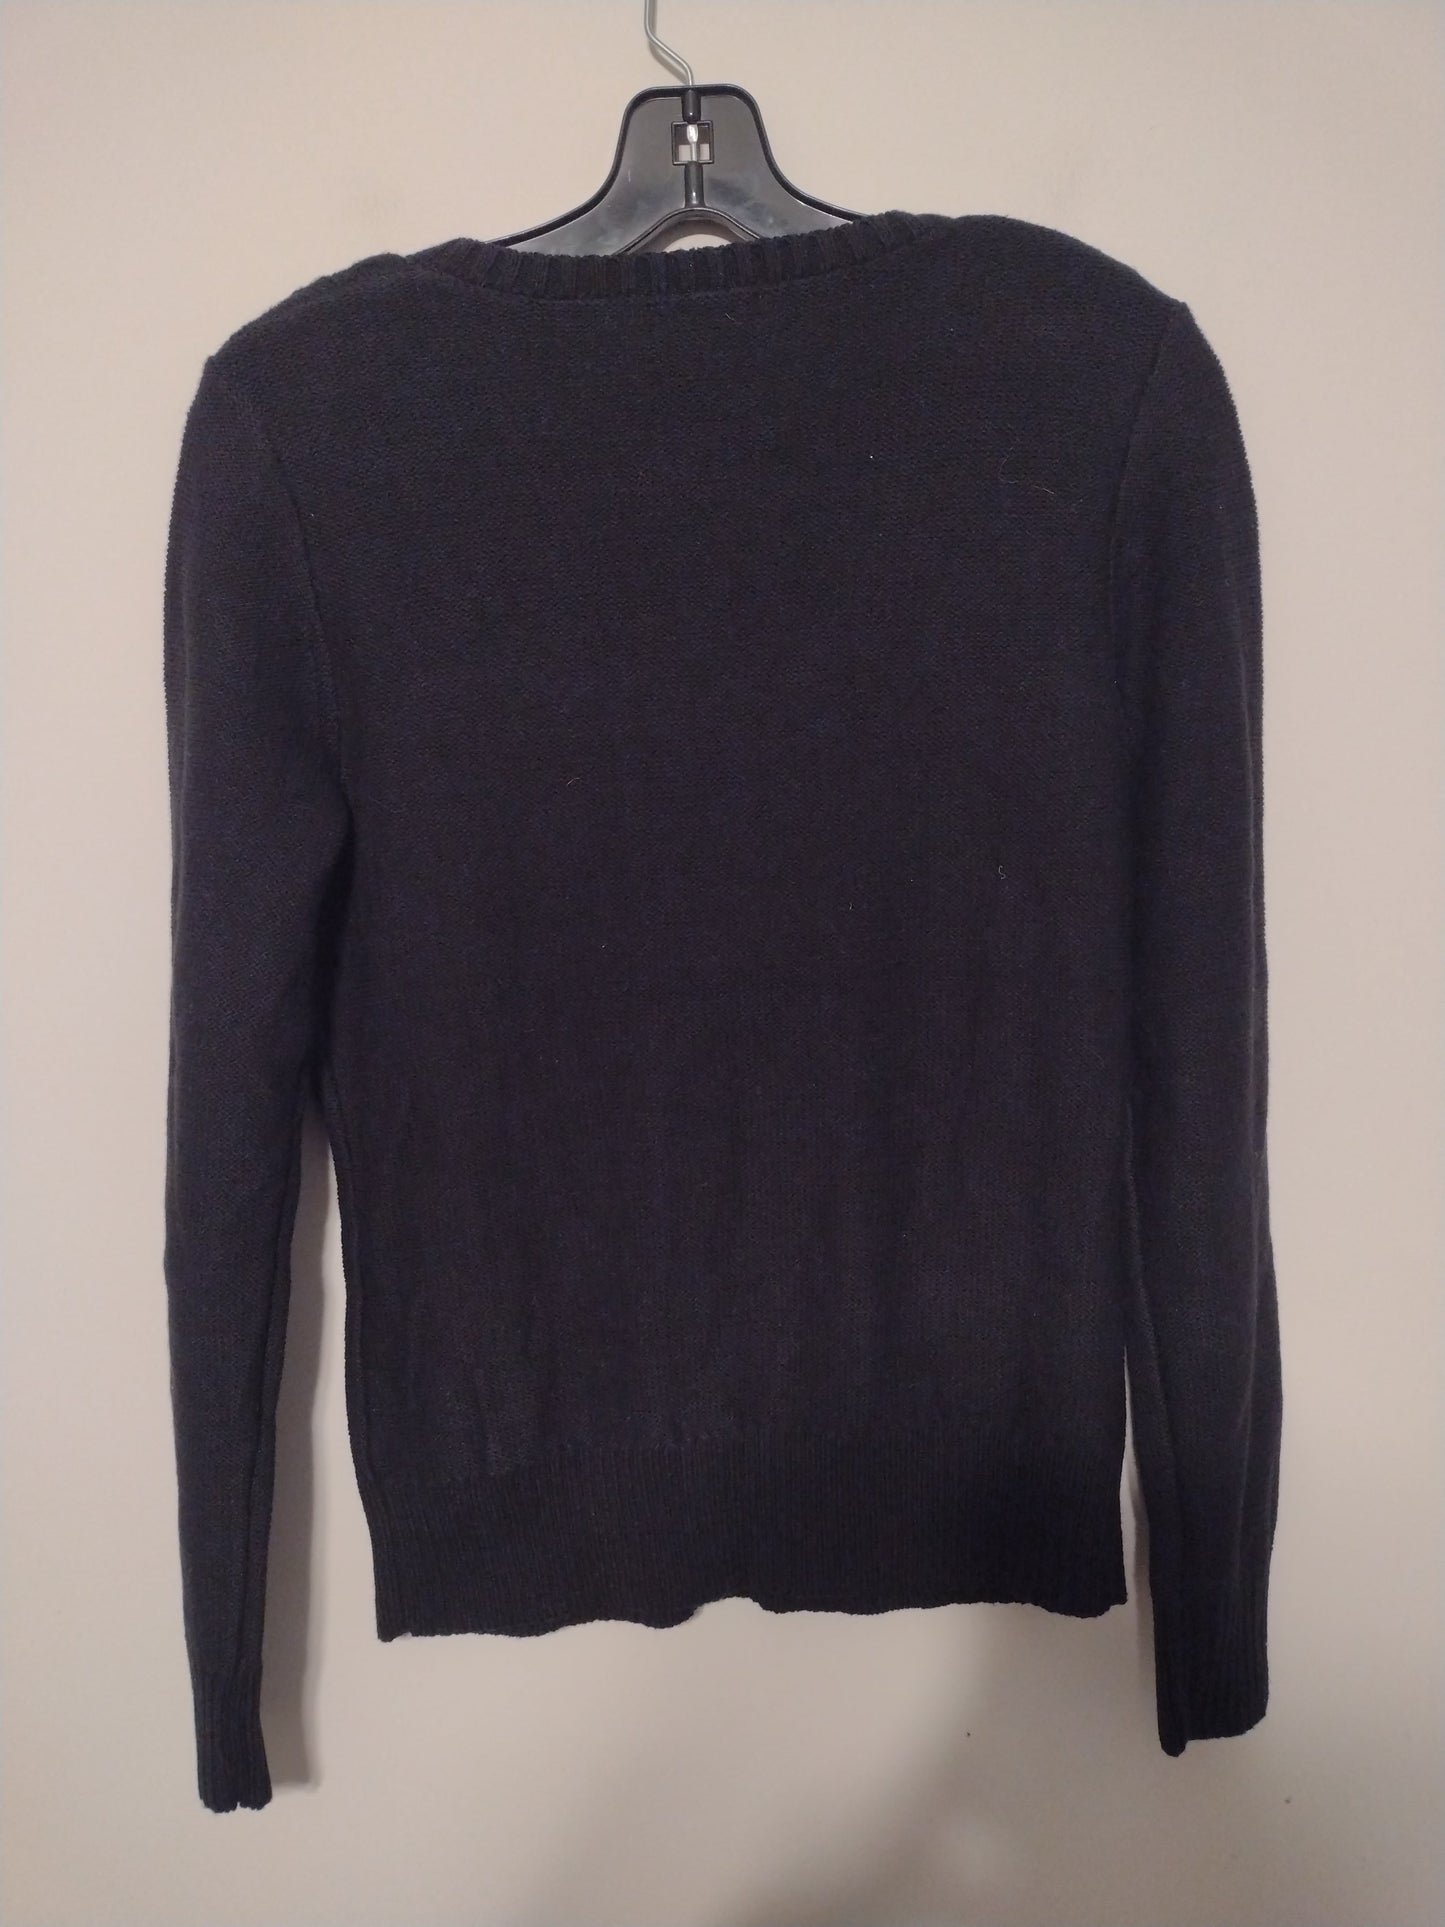 Sweater By Chaps  Size: M